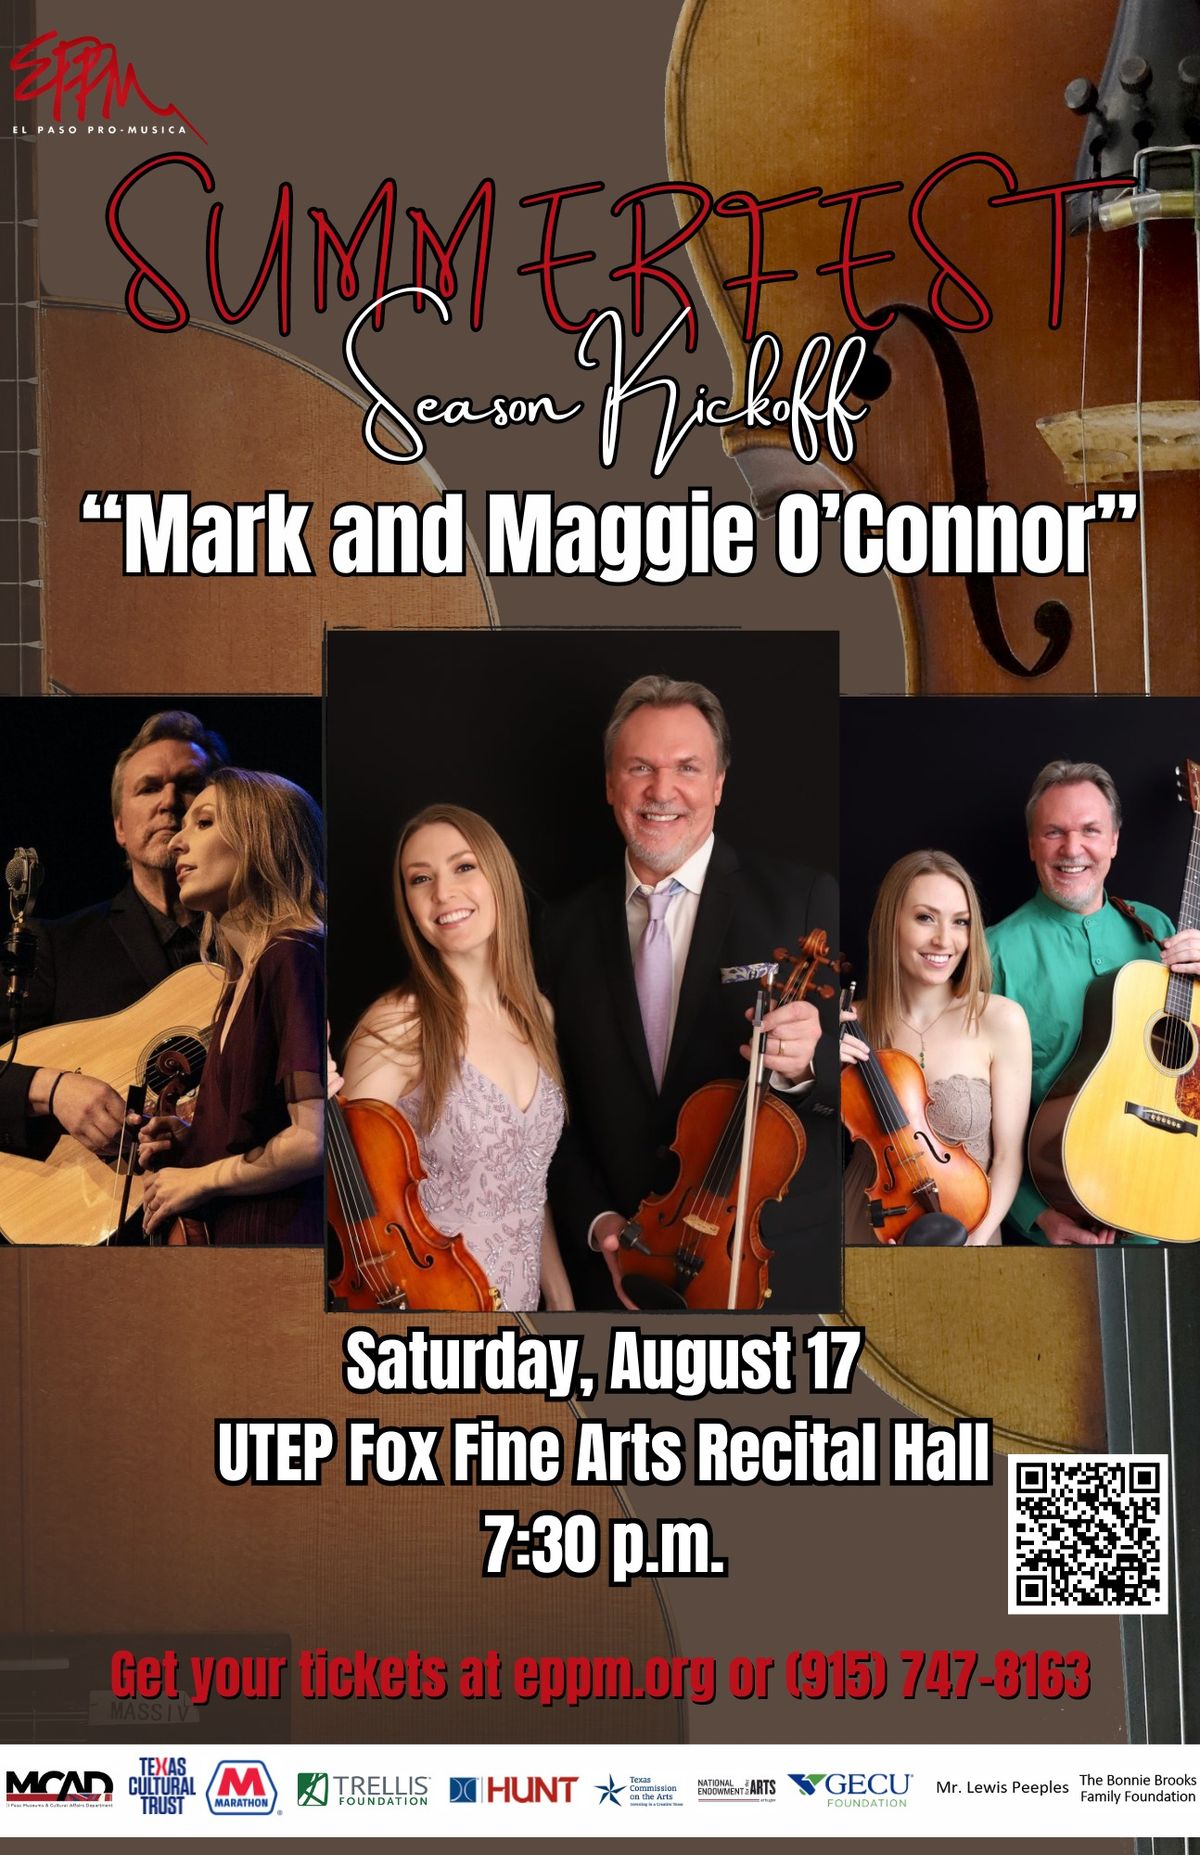 Bluegrass Country and Jazz Stars Mark and Maggie O'Connor